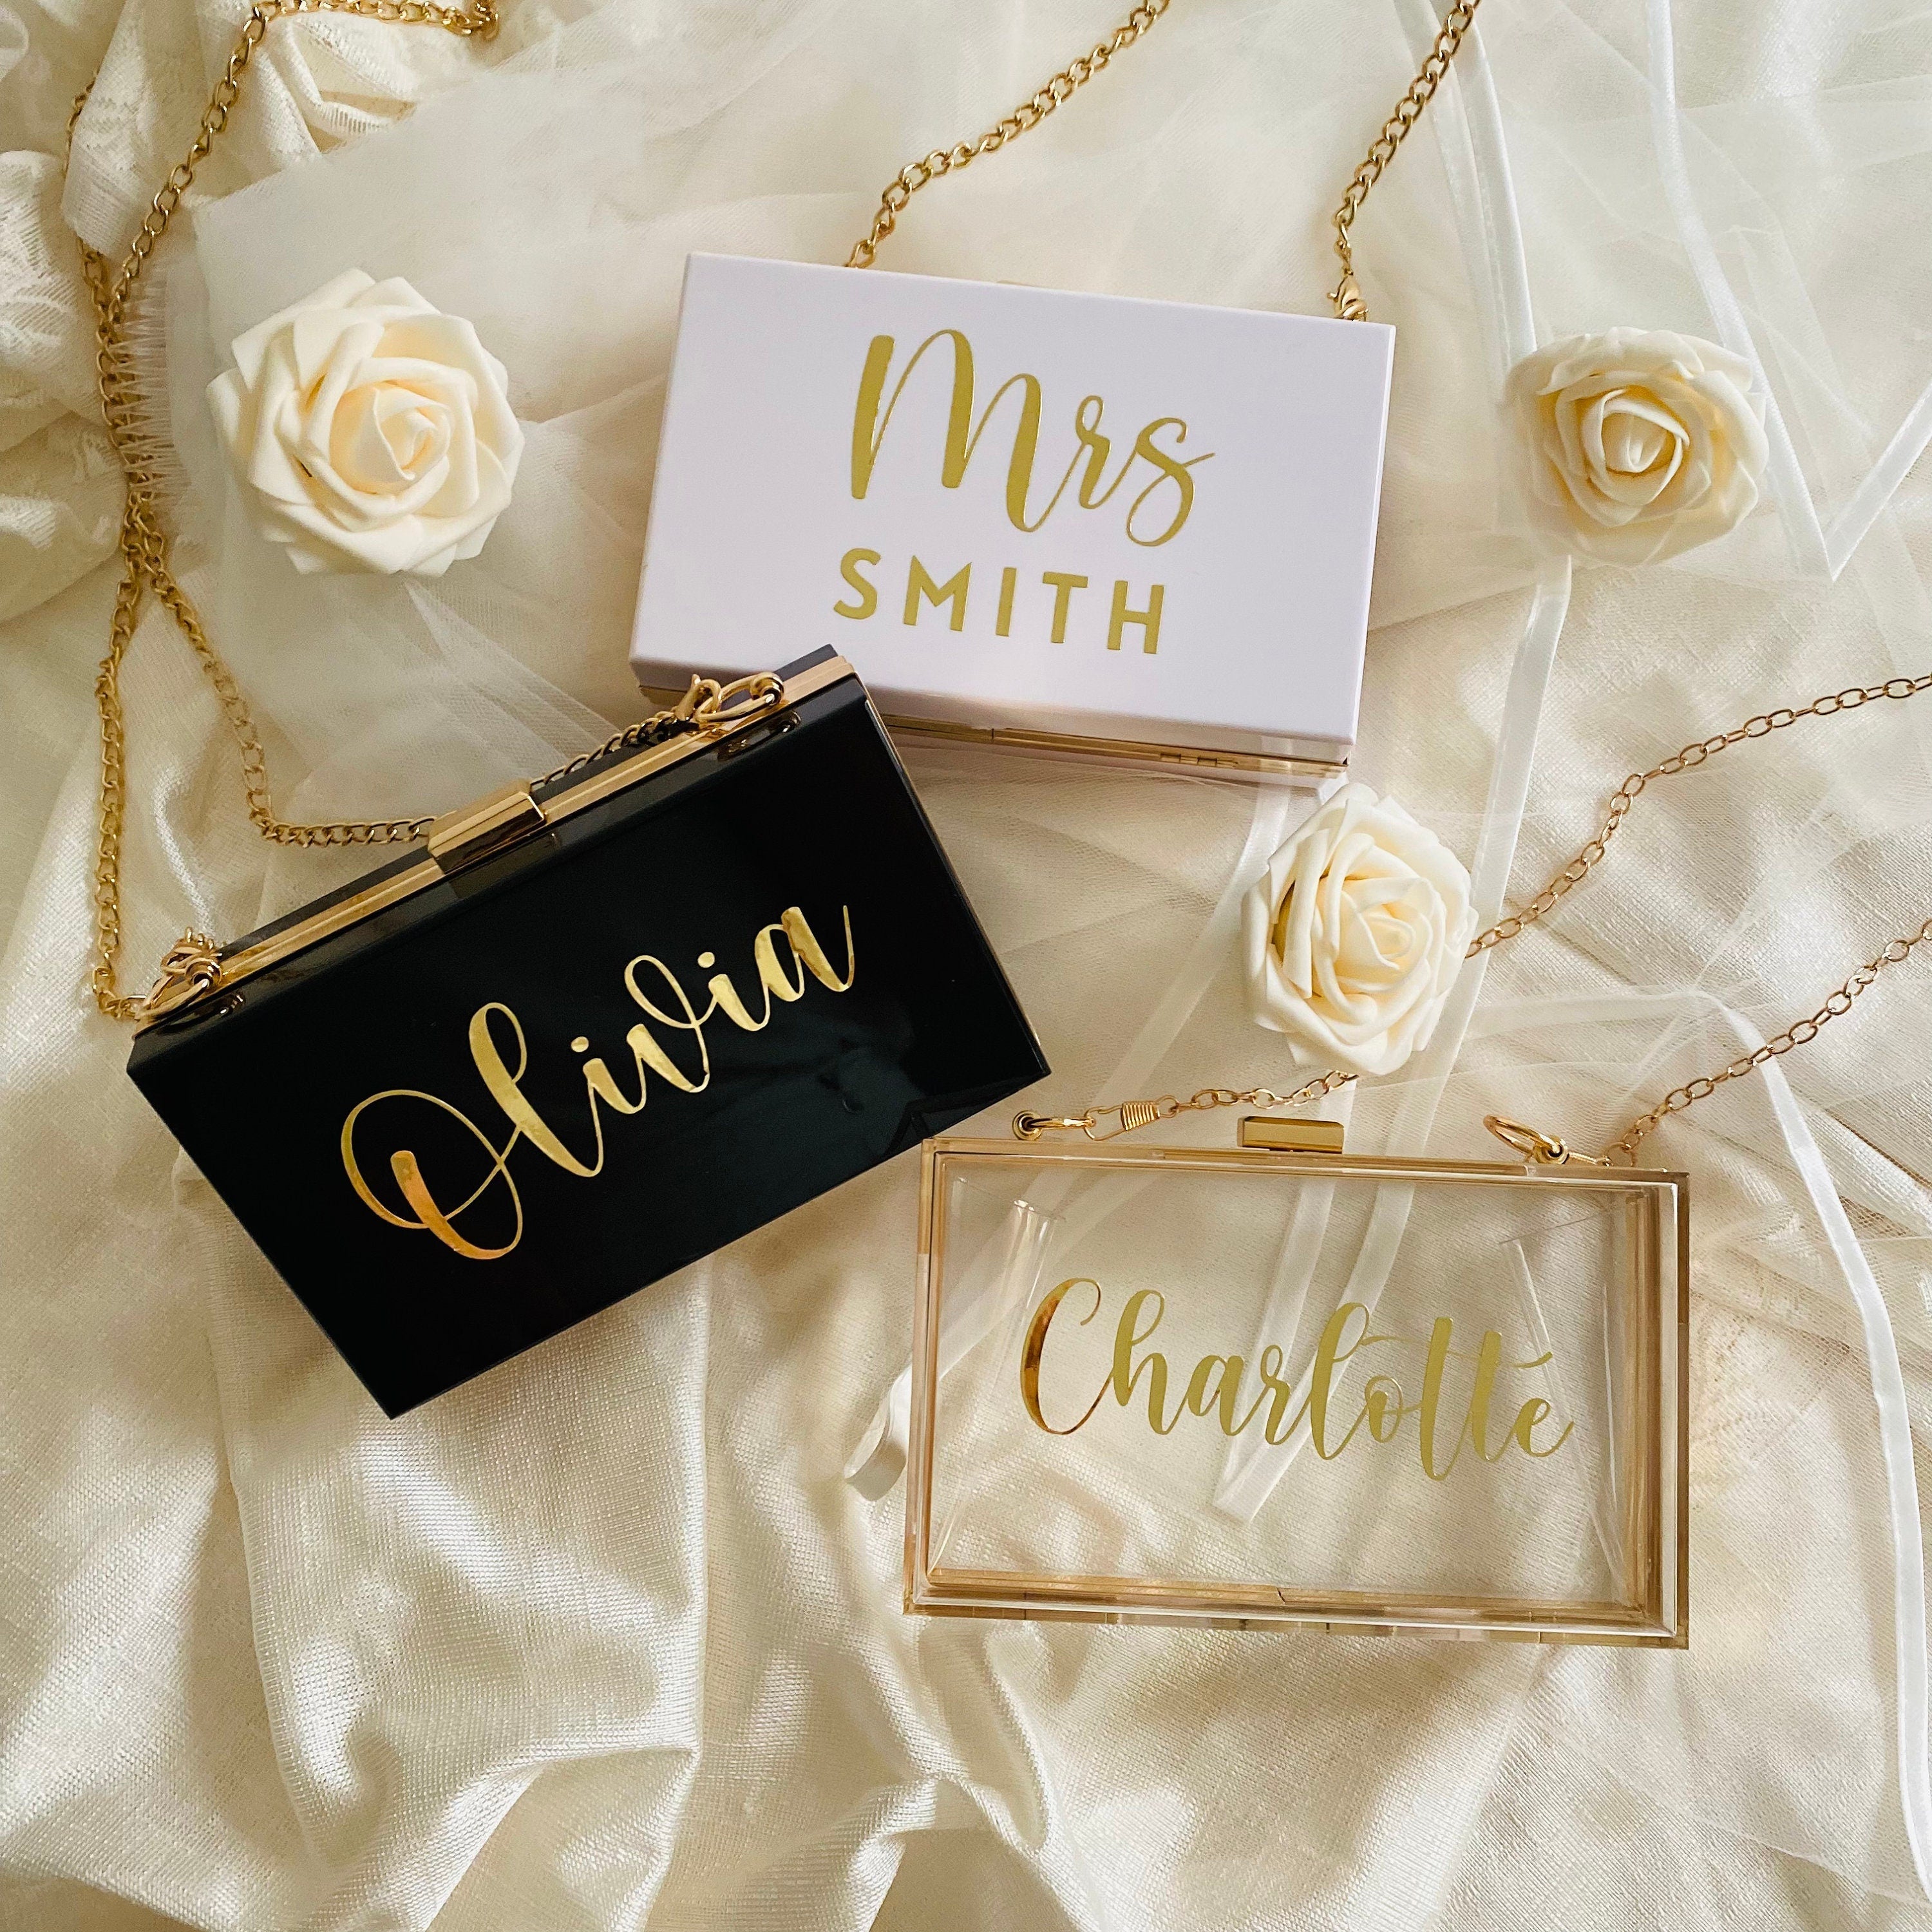 Personalised Clutch, Gift For Bridesmaid, Bridal Shower Maid Of Honour Mother Of The Bride, Hen Party Day Accessory